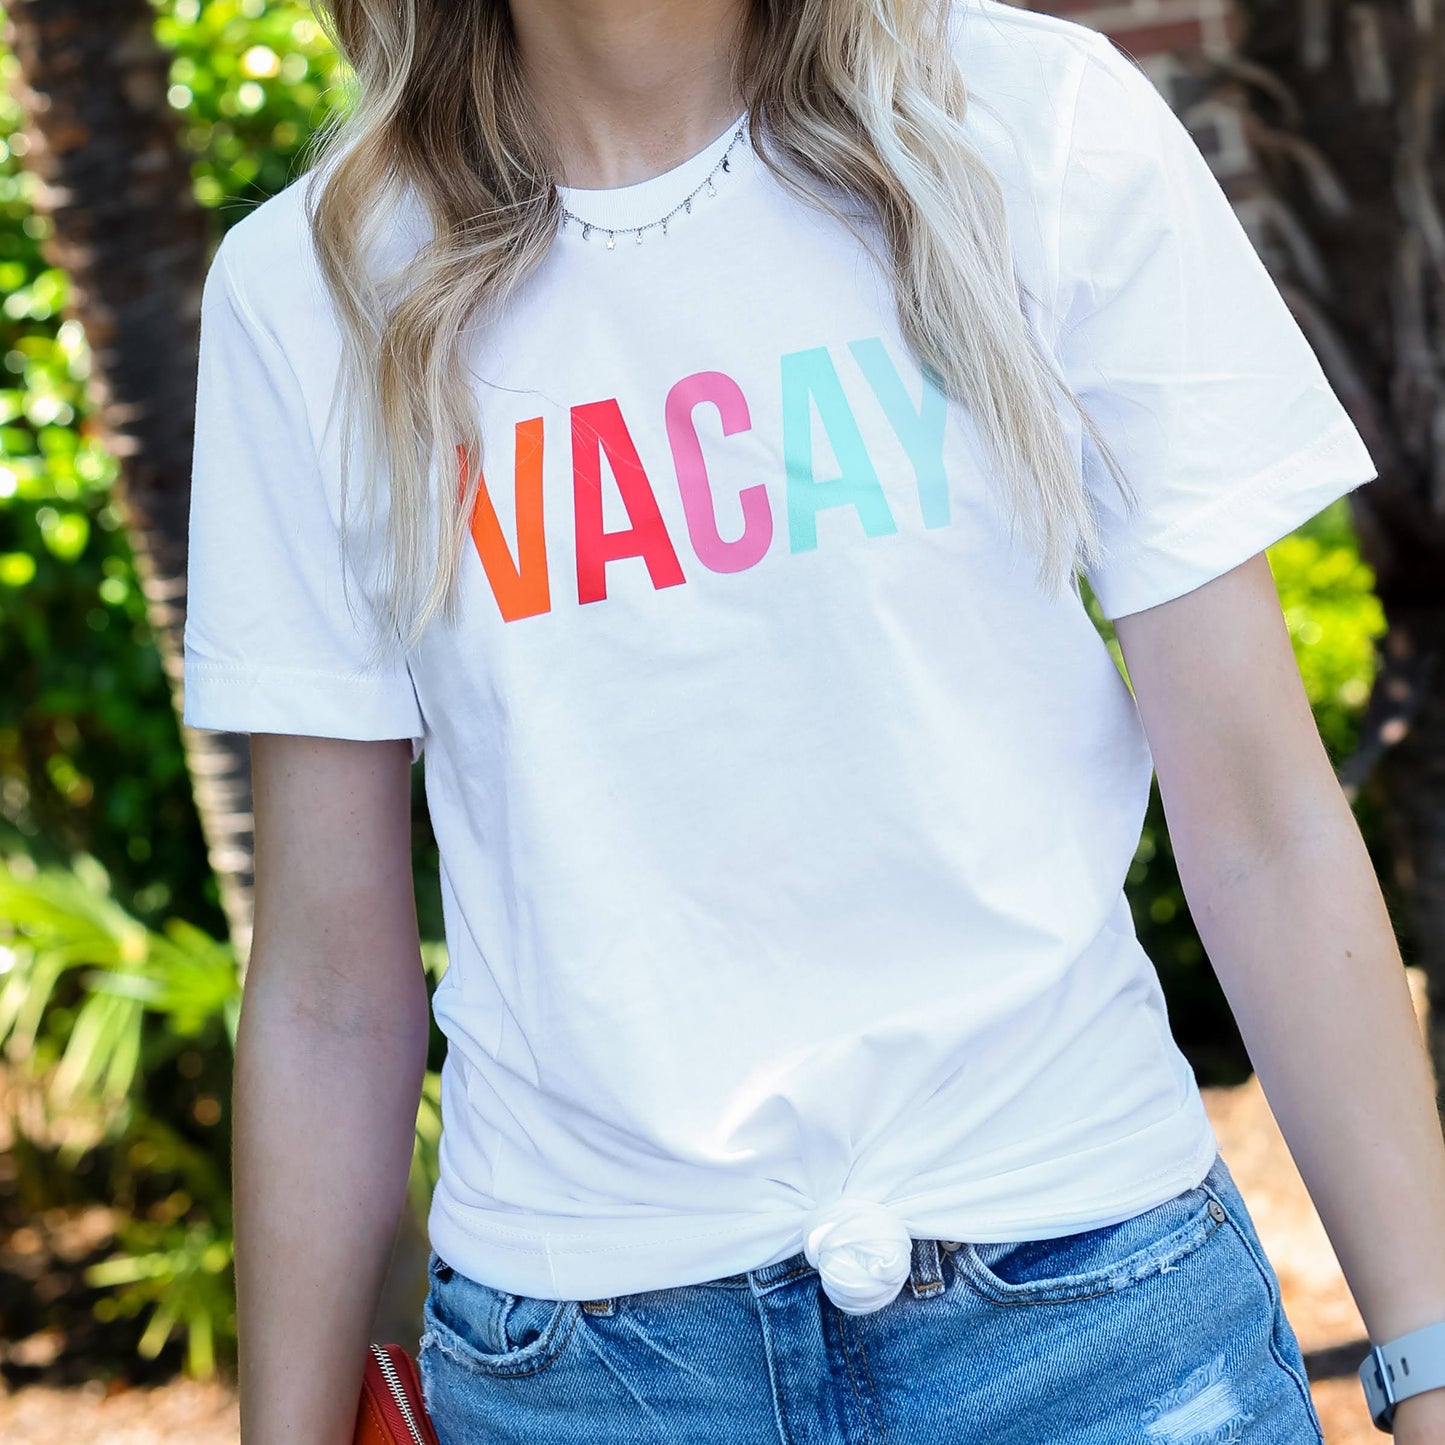 FINAL SALE Vacay Colorful Graphic Tee